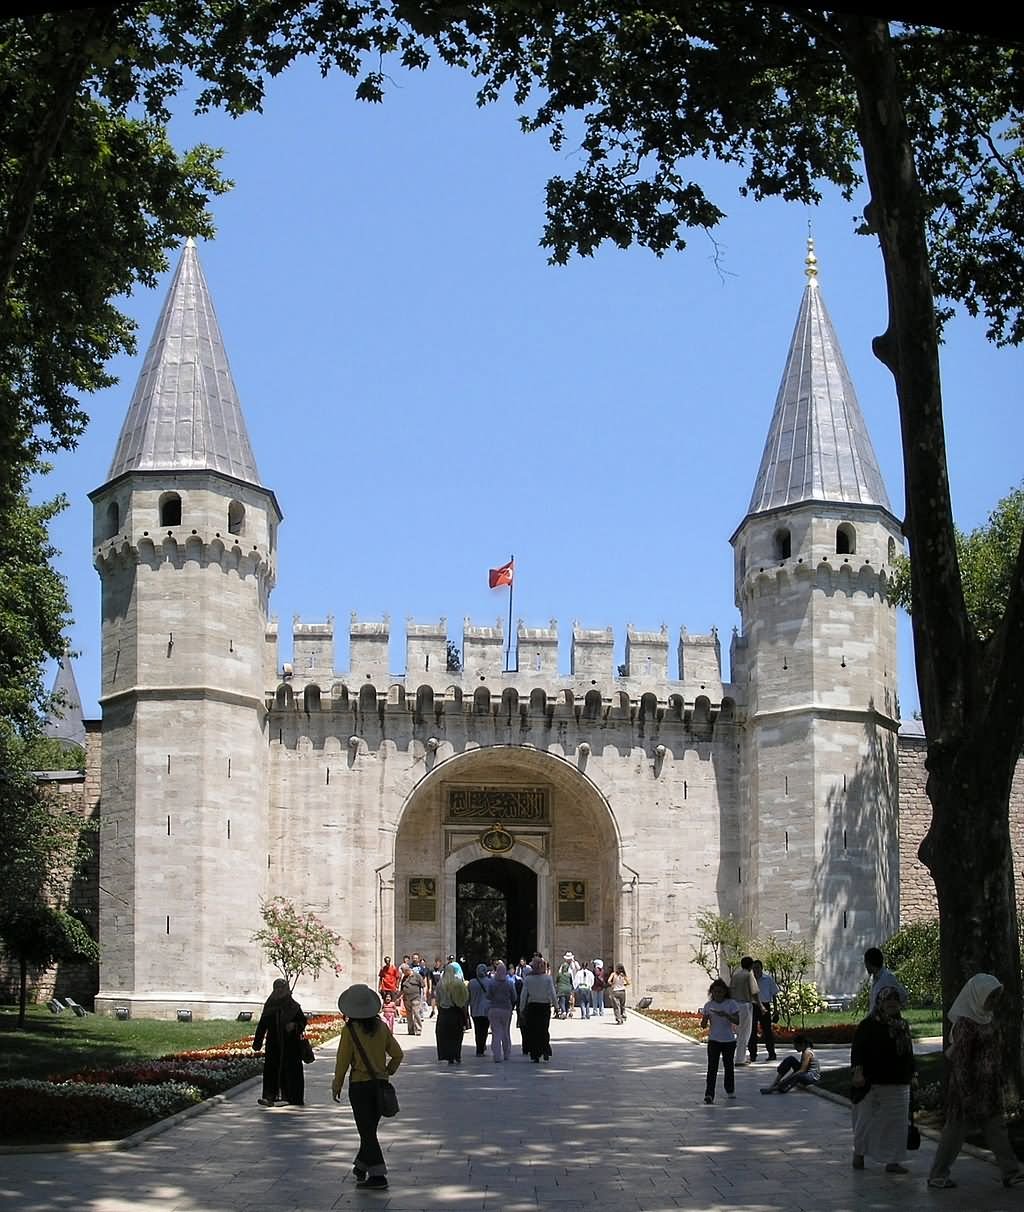 40 Very Beautiful Topkapi Palace In Istanbul, Turkey Pictures And Images